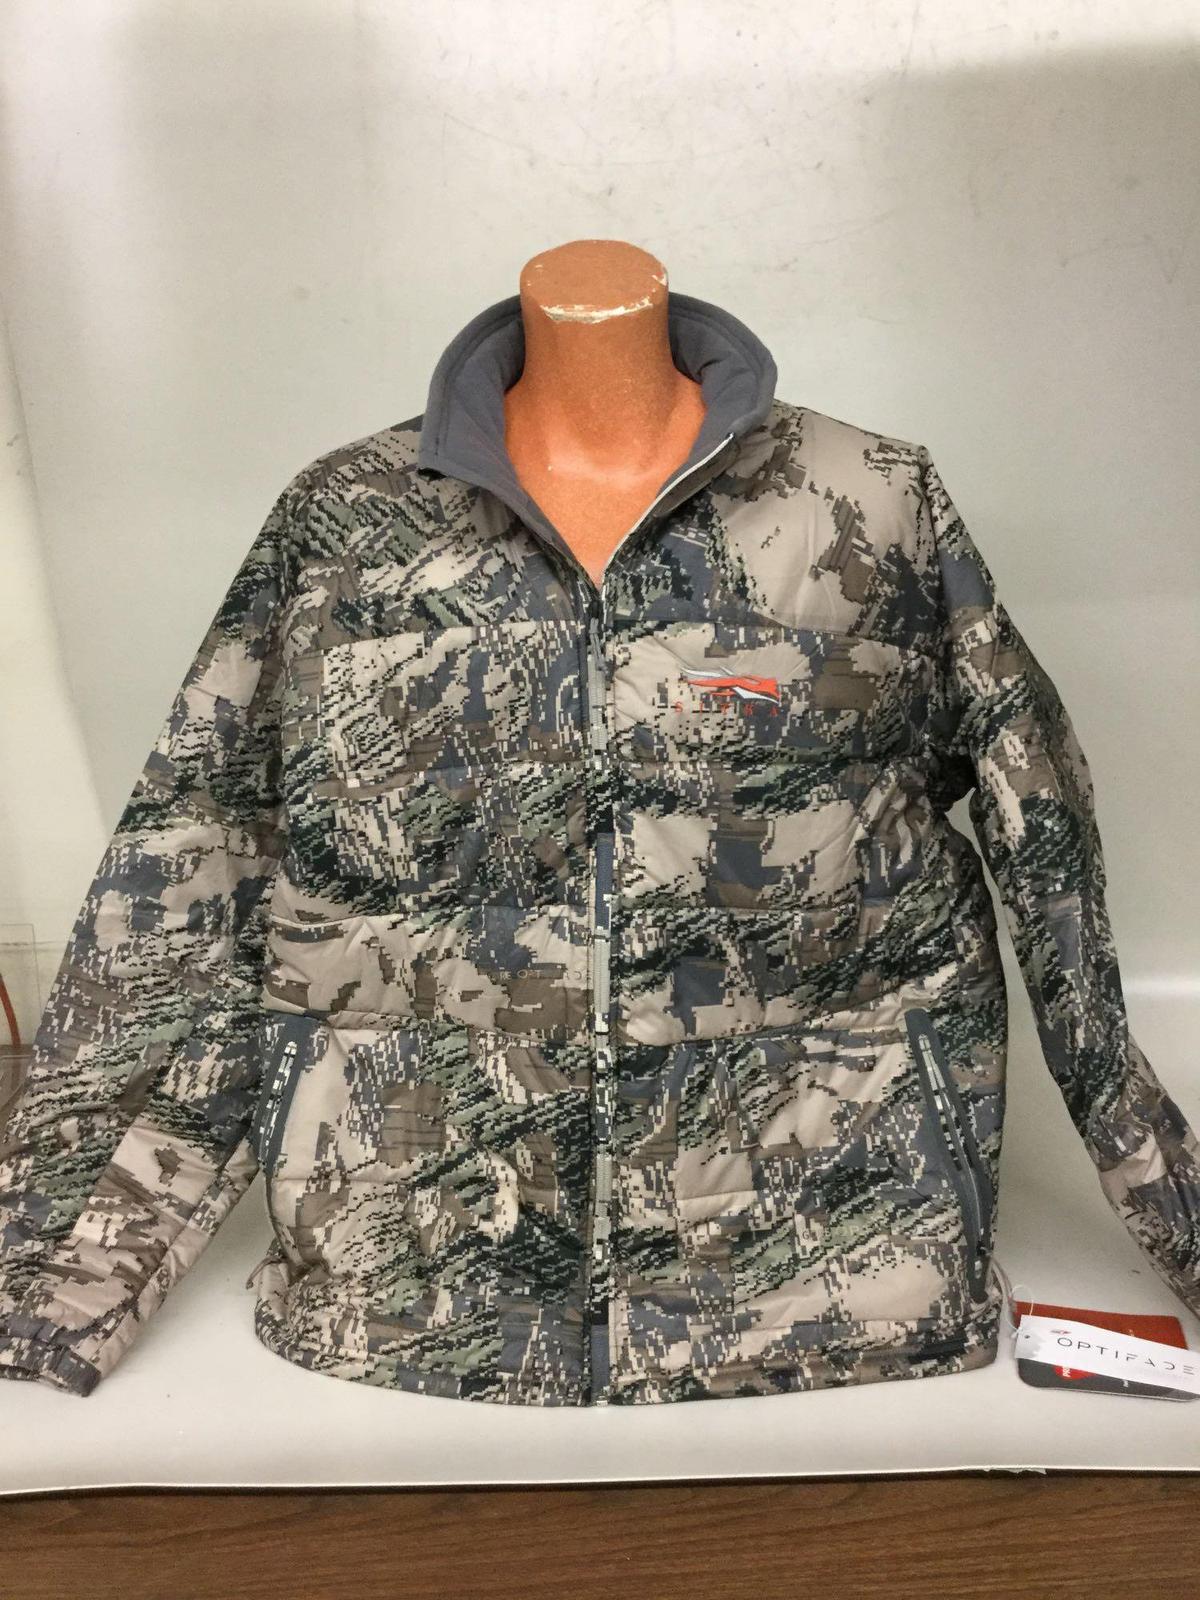 1 New Sitka Optifade Open Country Keivin Jacket.